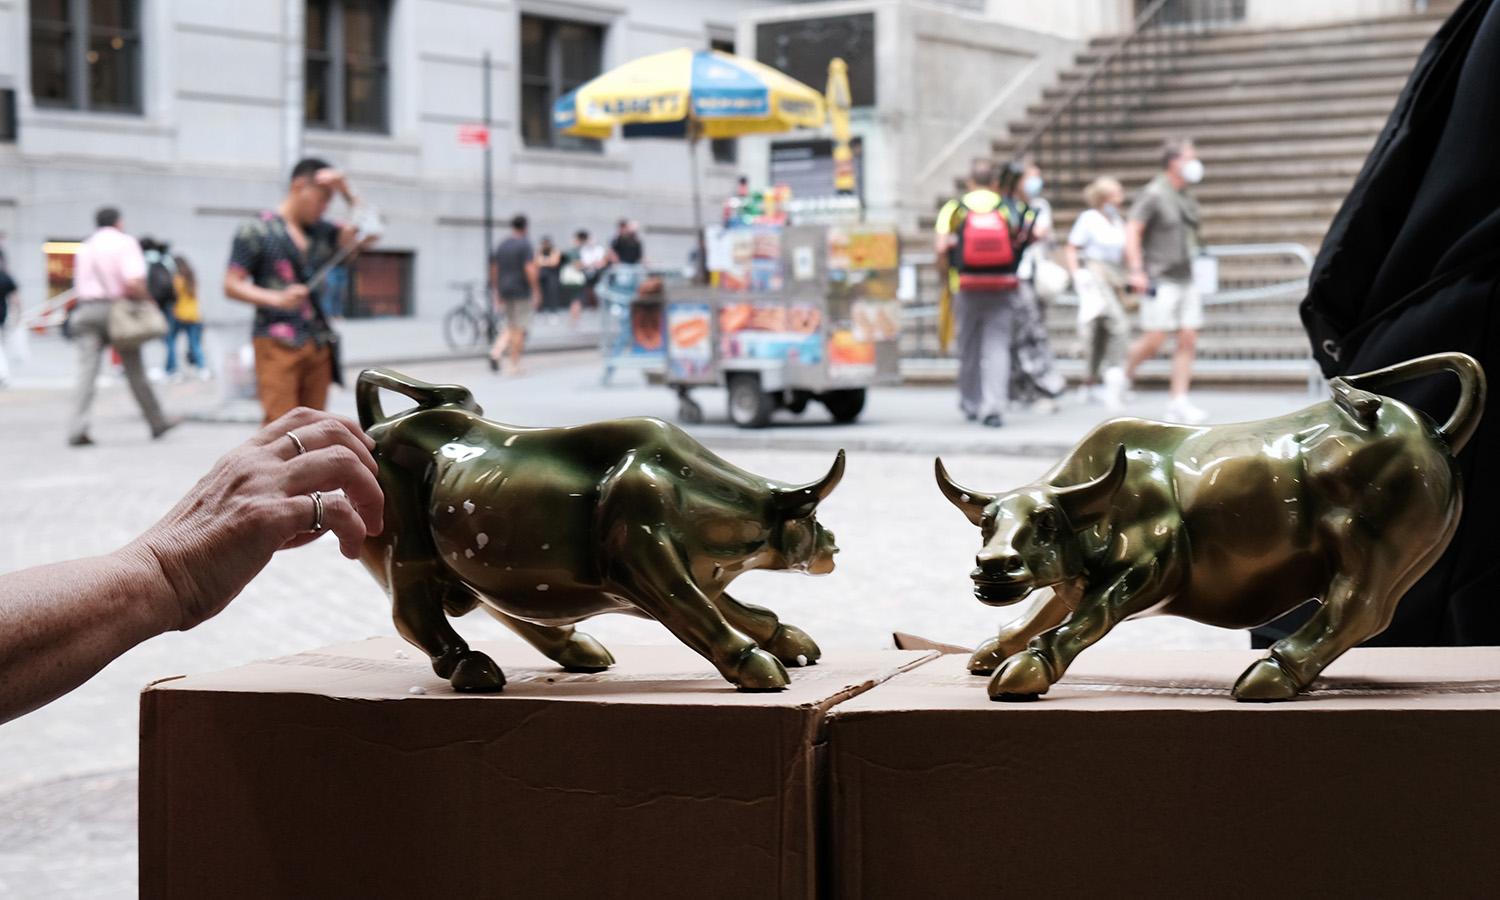 A vendor sells replicas of the Wall Street Bull outside of the New York Stock Exchange (NYSE) on Sept. 16, 2021, in New York City.  (Photo by Spencer Platt/Getty Images)